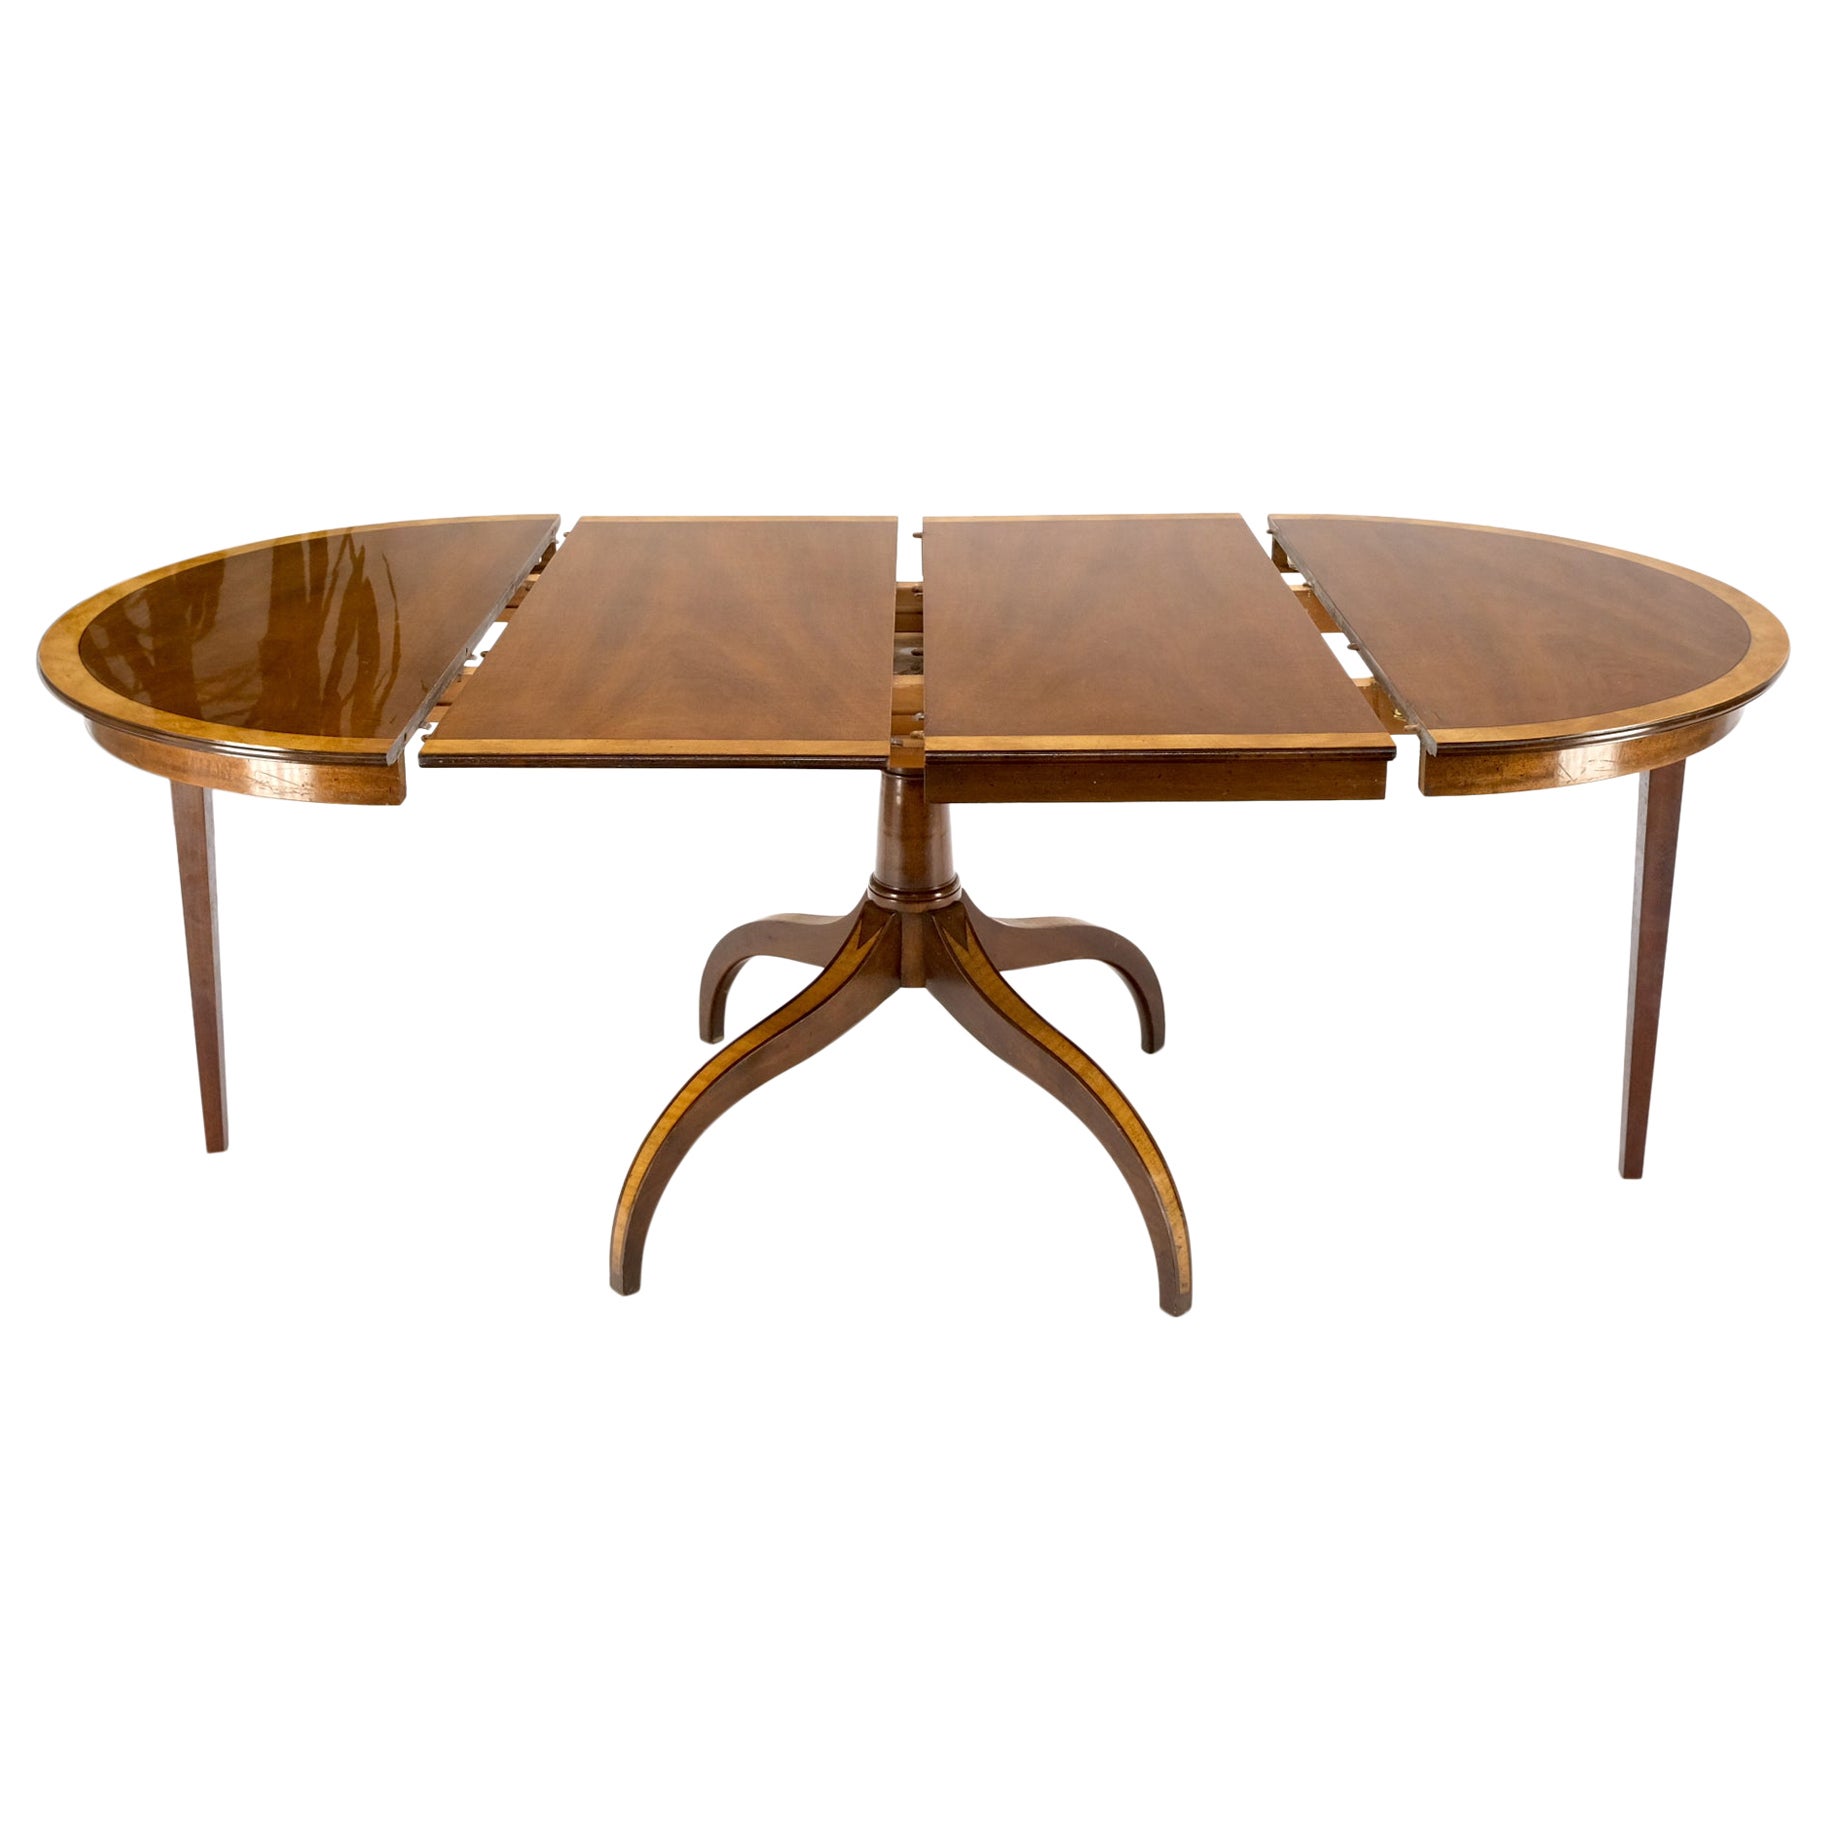 Charak Lacquered Mahogany Banded Round Dining Table w/ 2 Leaves Inlaid Legs Mint For Sale